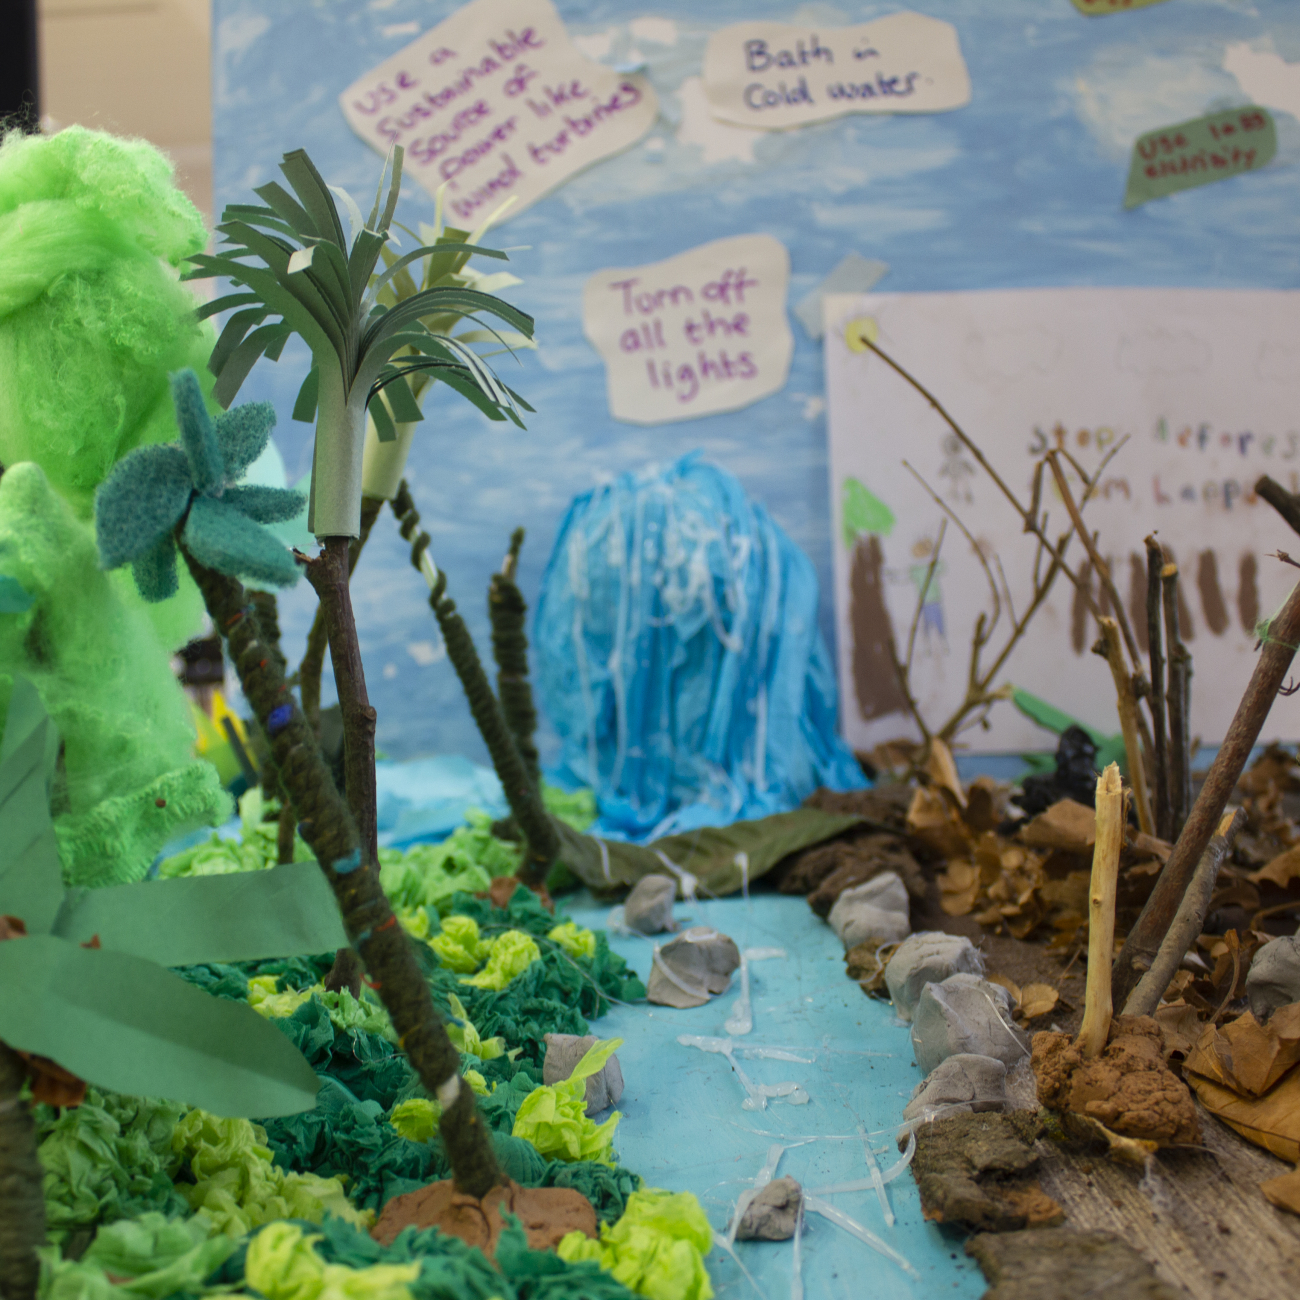 environmental model of trees made from recycled paper